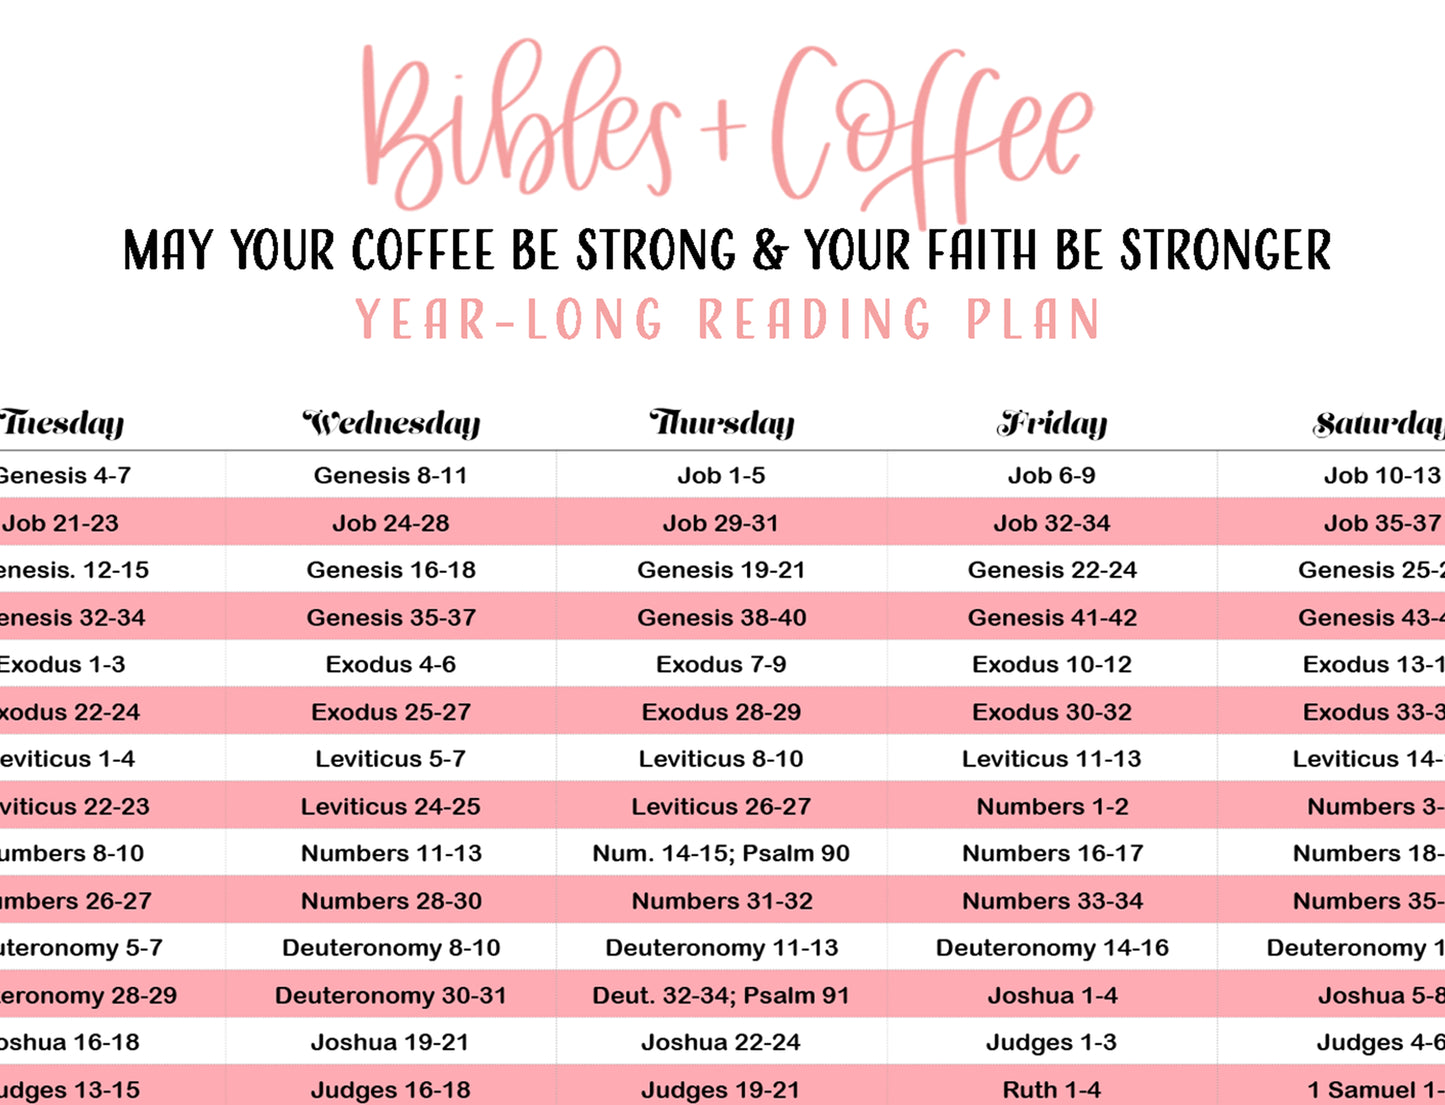 365 Day Chronological Reading Plan (Digital Download) - Bibles and Coffee